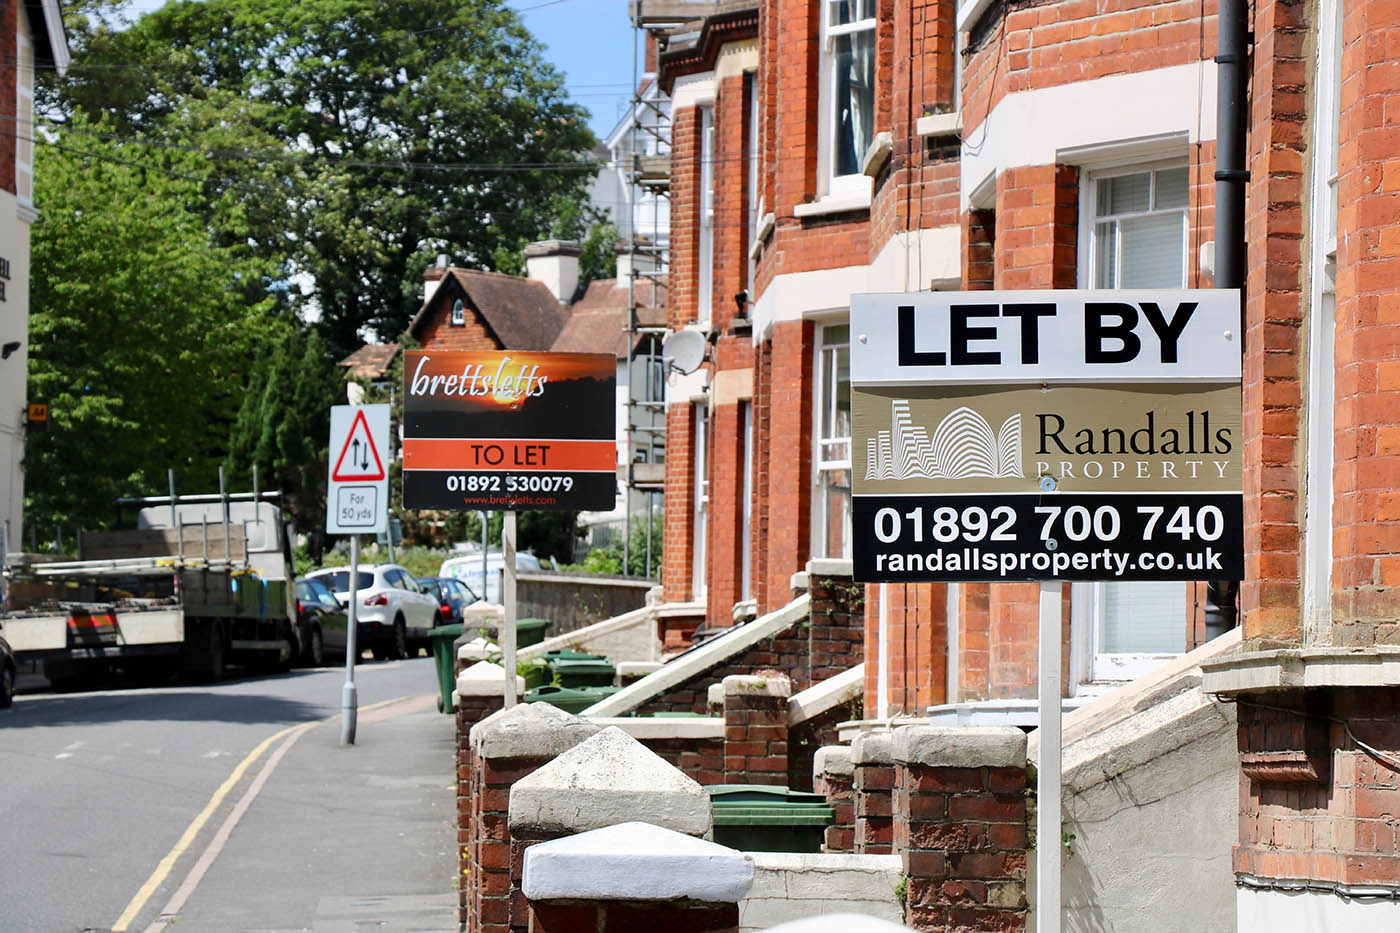 Getting a buy to let mortgage with bad credit - https://roomslocal.co.uk/blog/getting-a-buy-to-let-mortgage-with-bad-credit #mortgage #with #credit